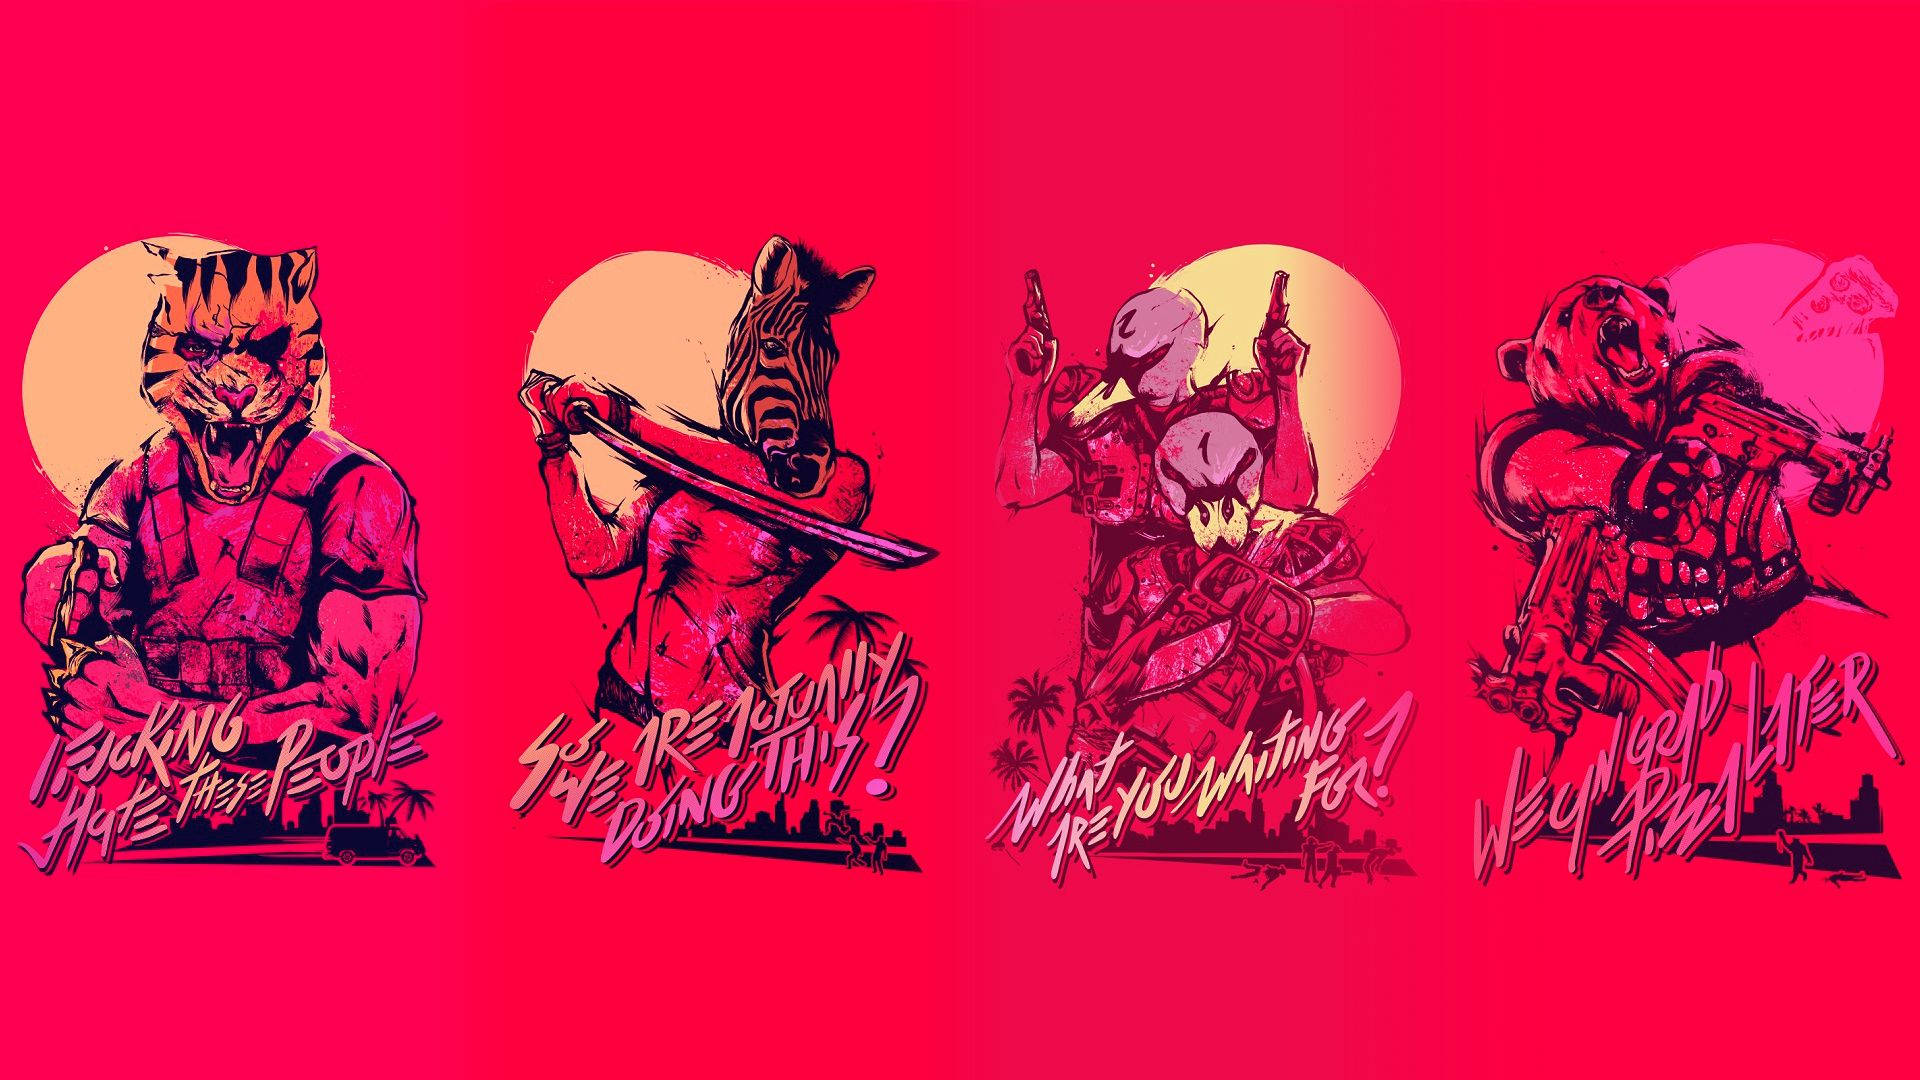 Combat and chaos in Hotline Miami 2: Wrong Number. Wallpaper